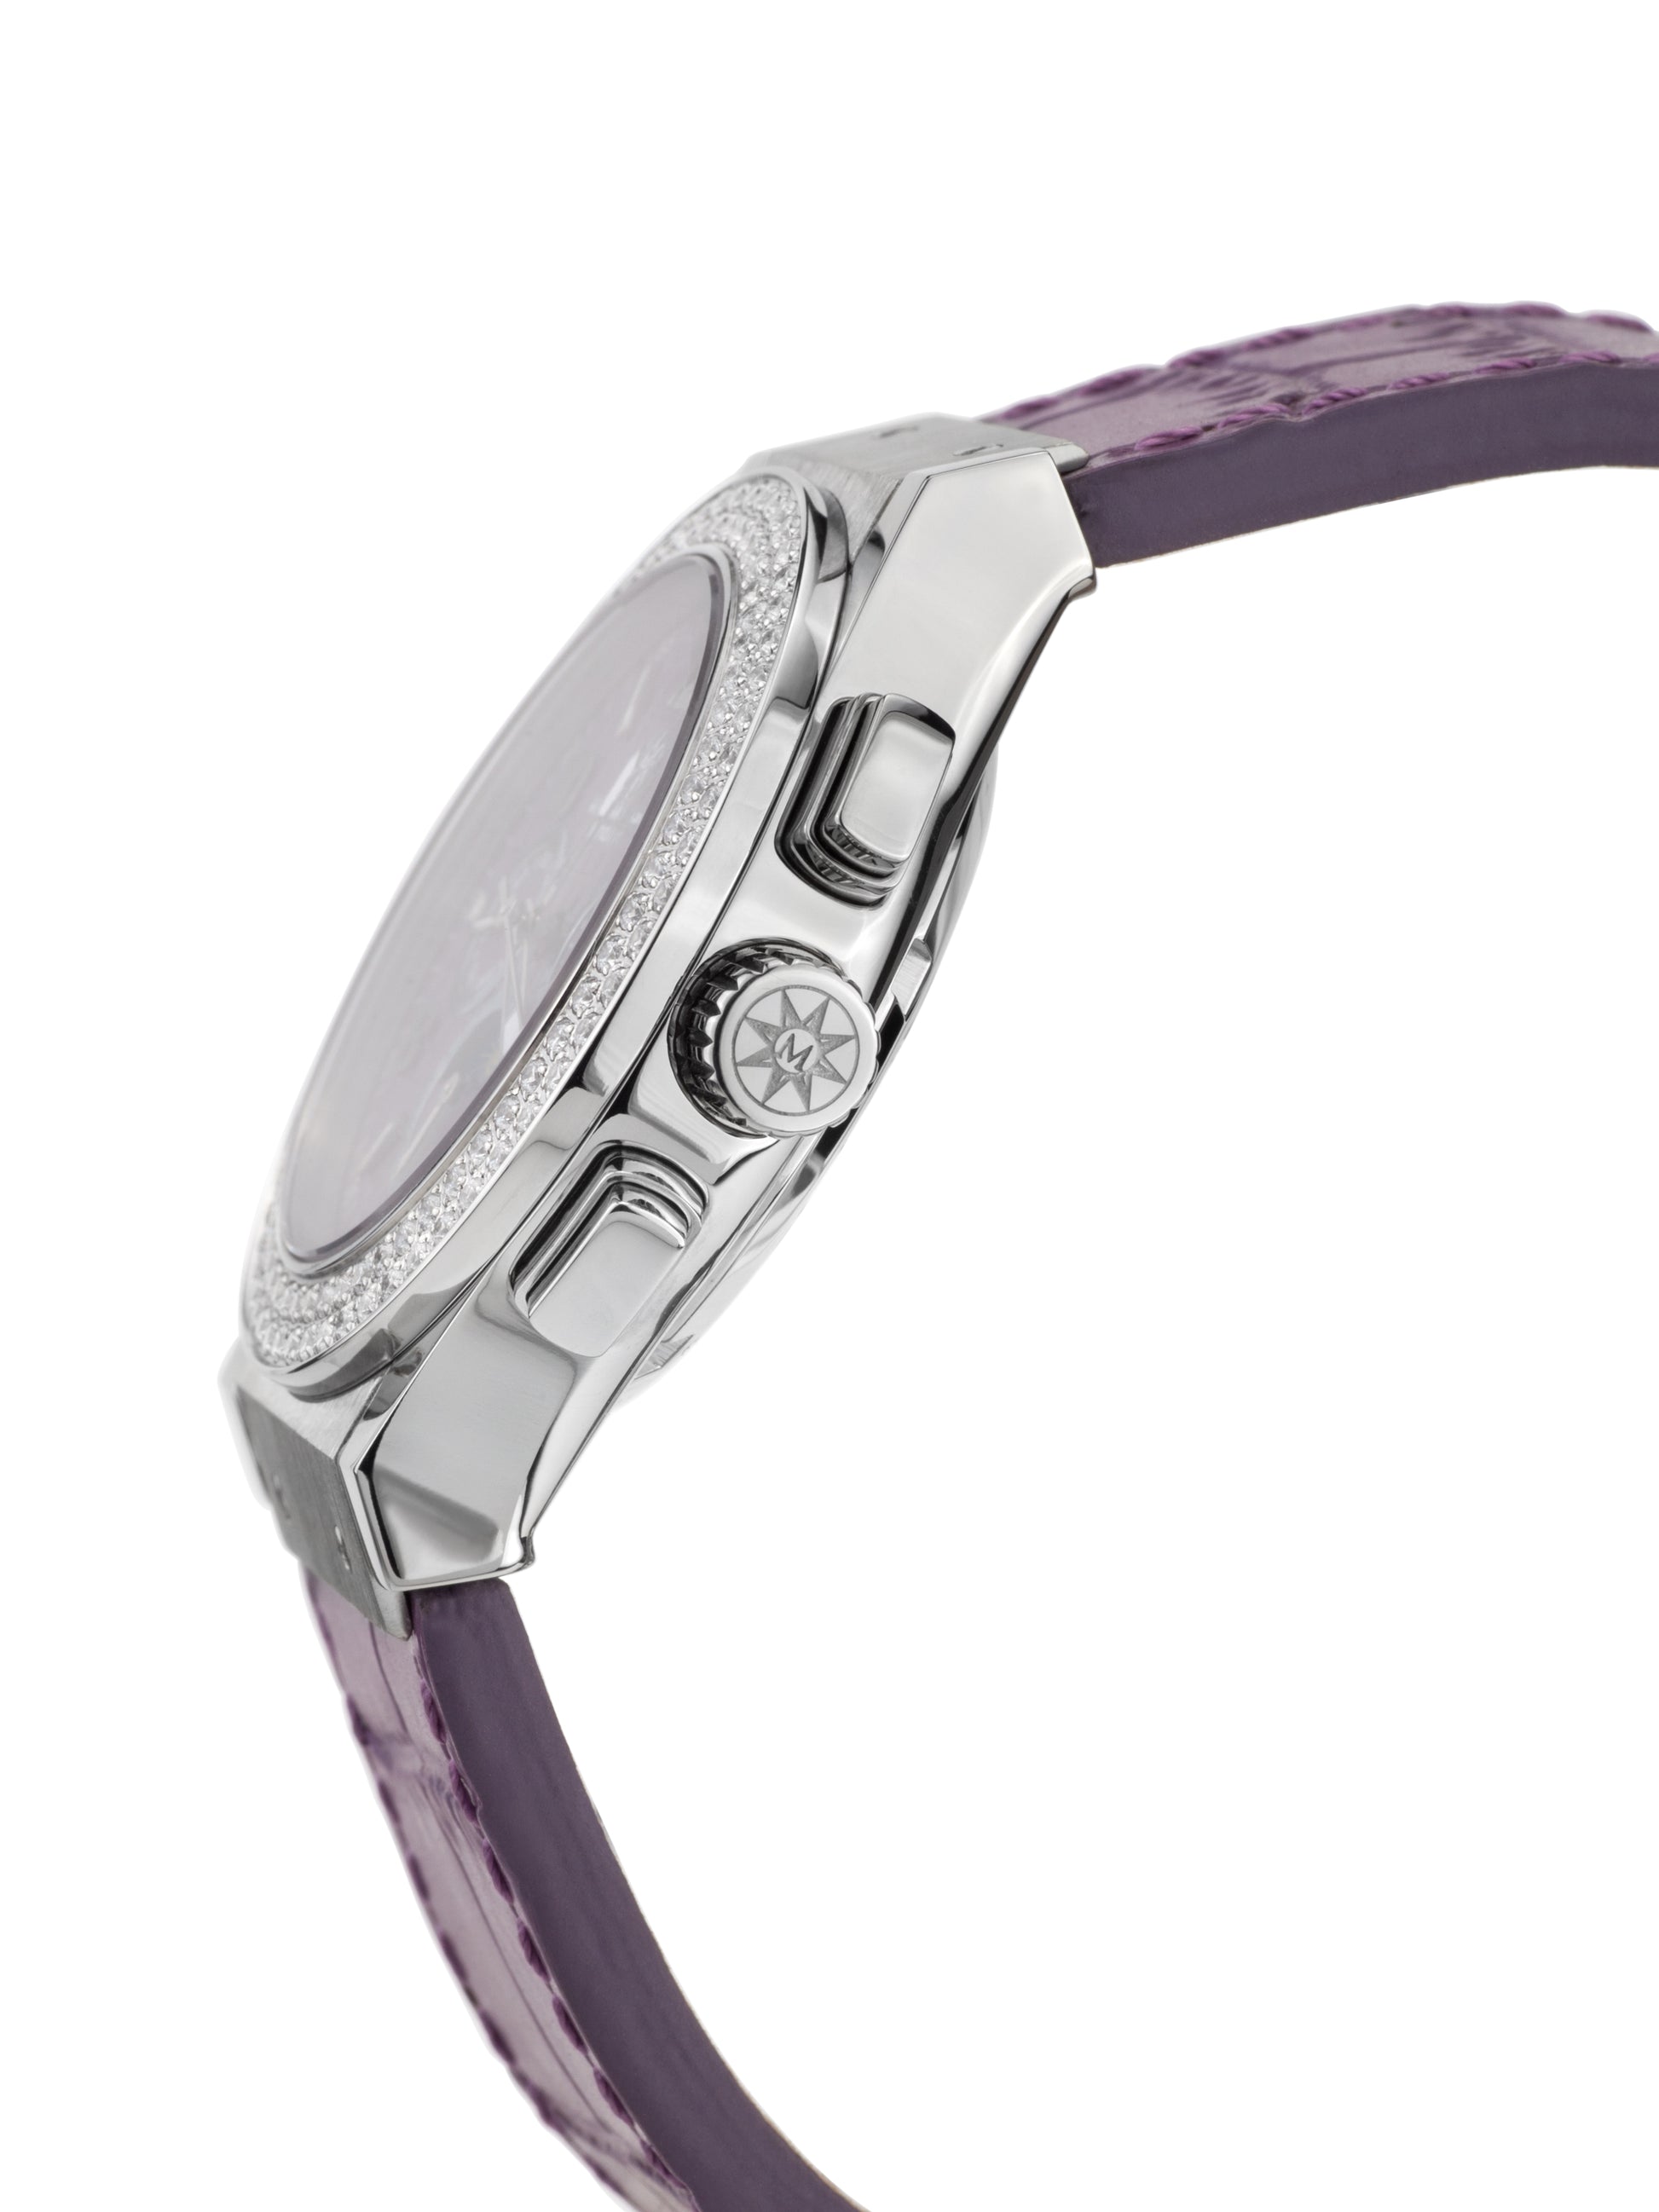 Automatic watches — Noblesse Lady — Mathis Montabon — violet